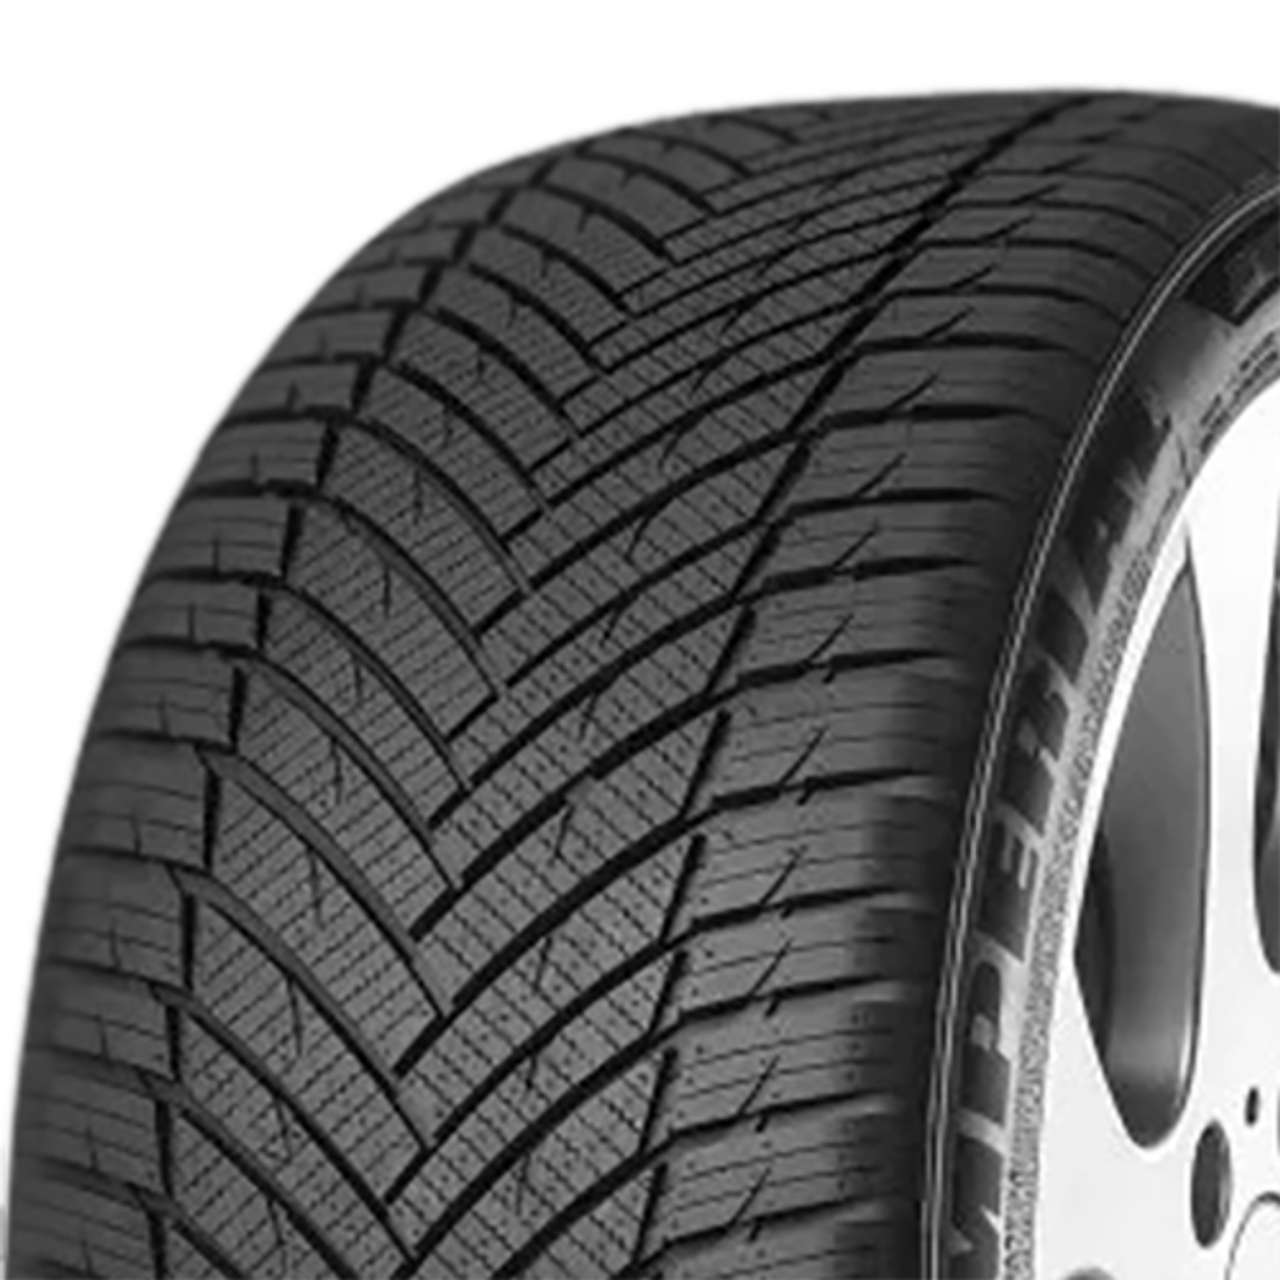 IMPERIAL AS DRIVER 155/65R14 75T